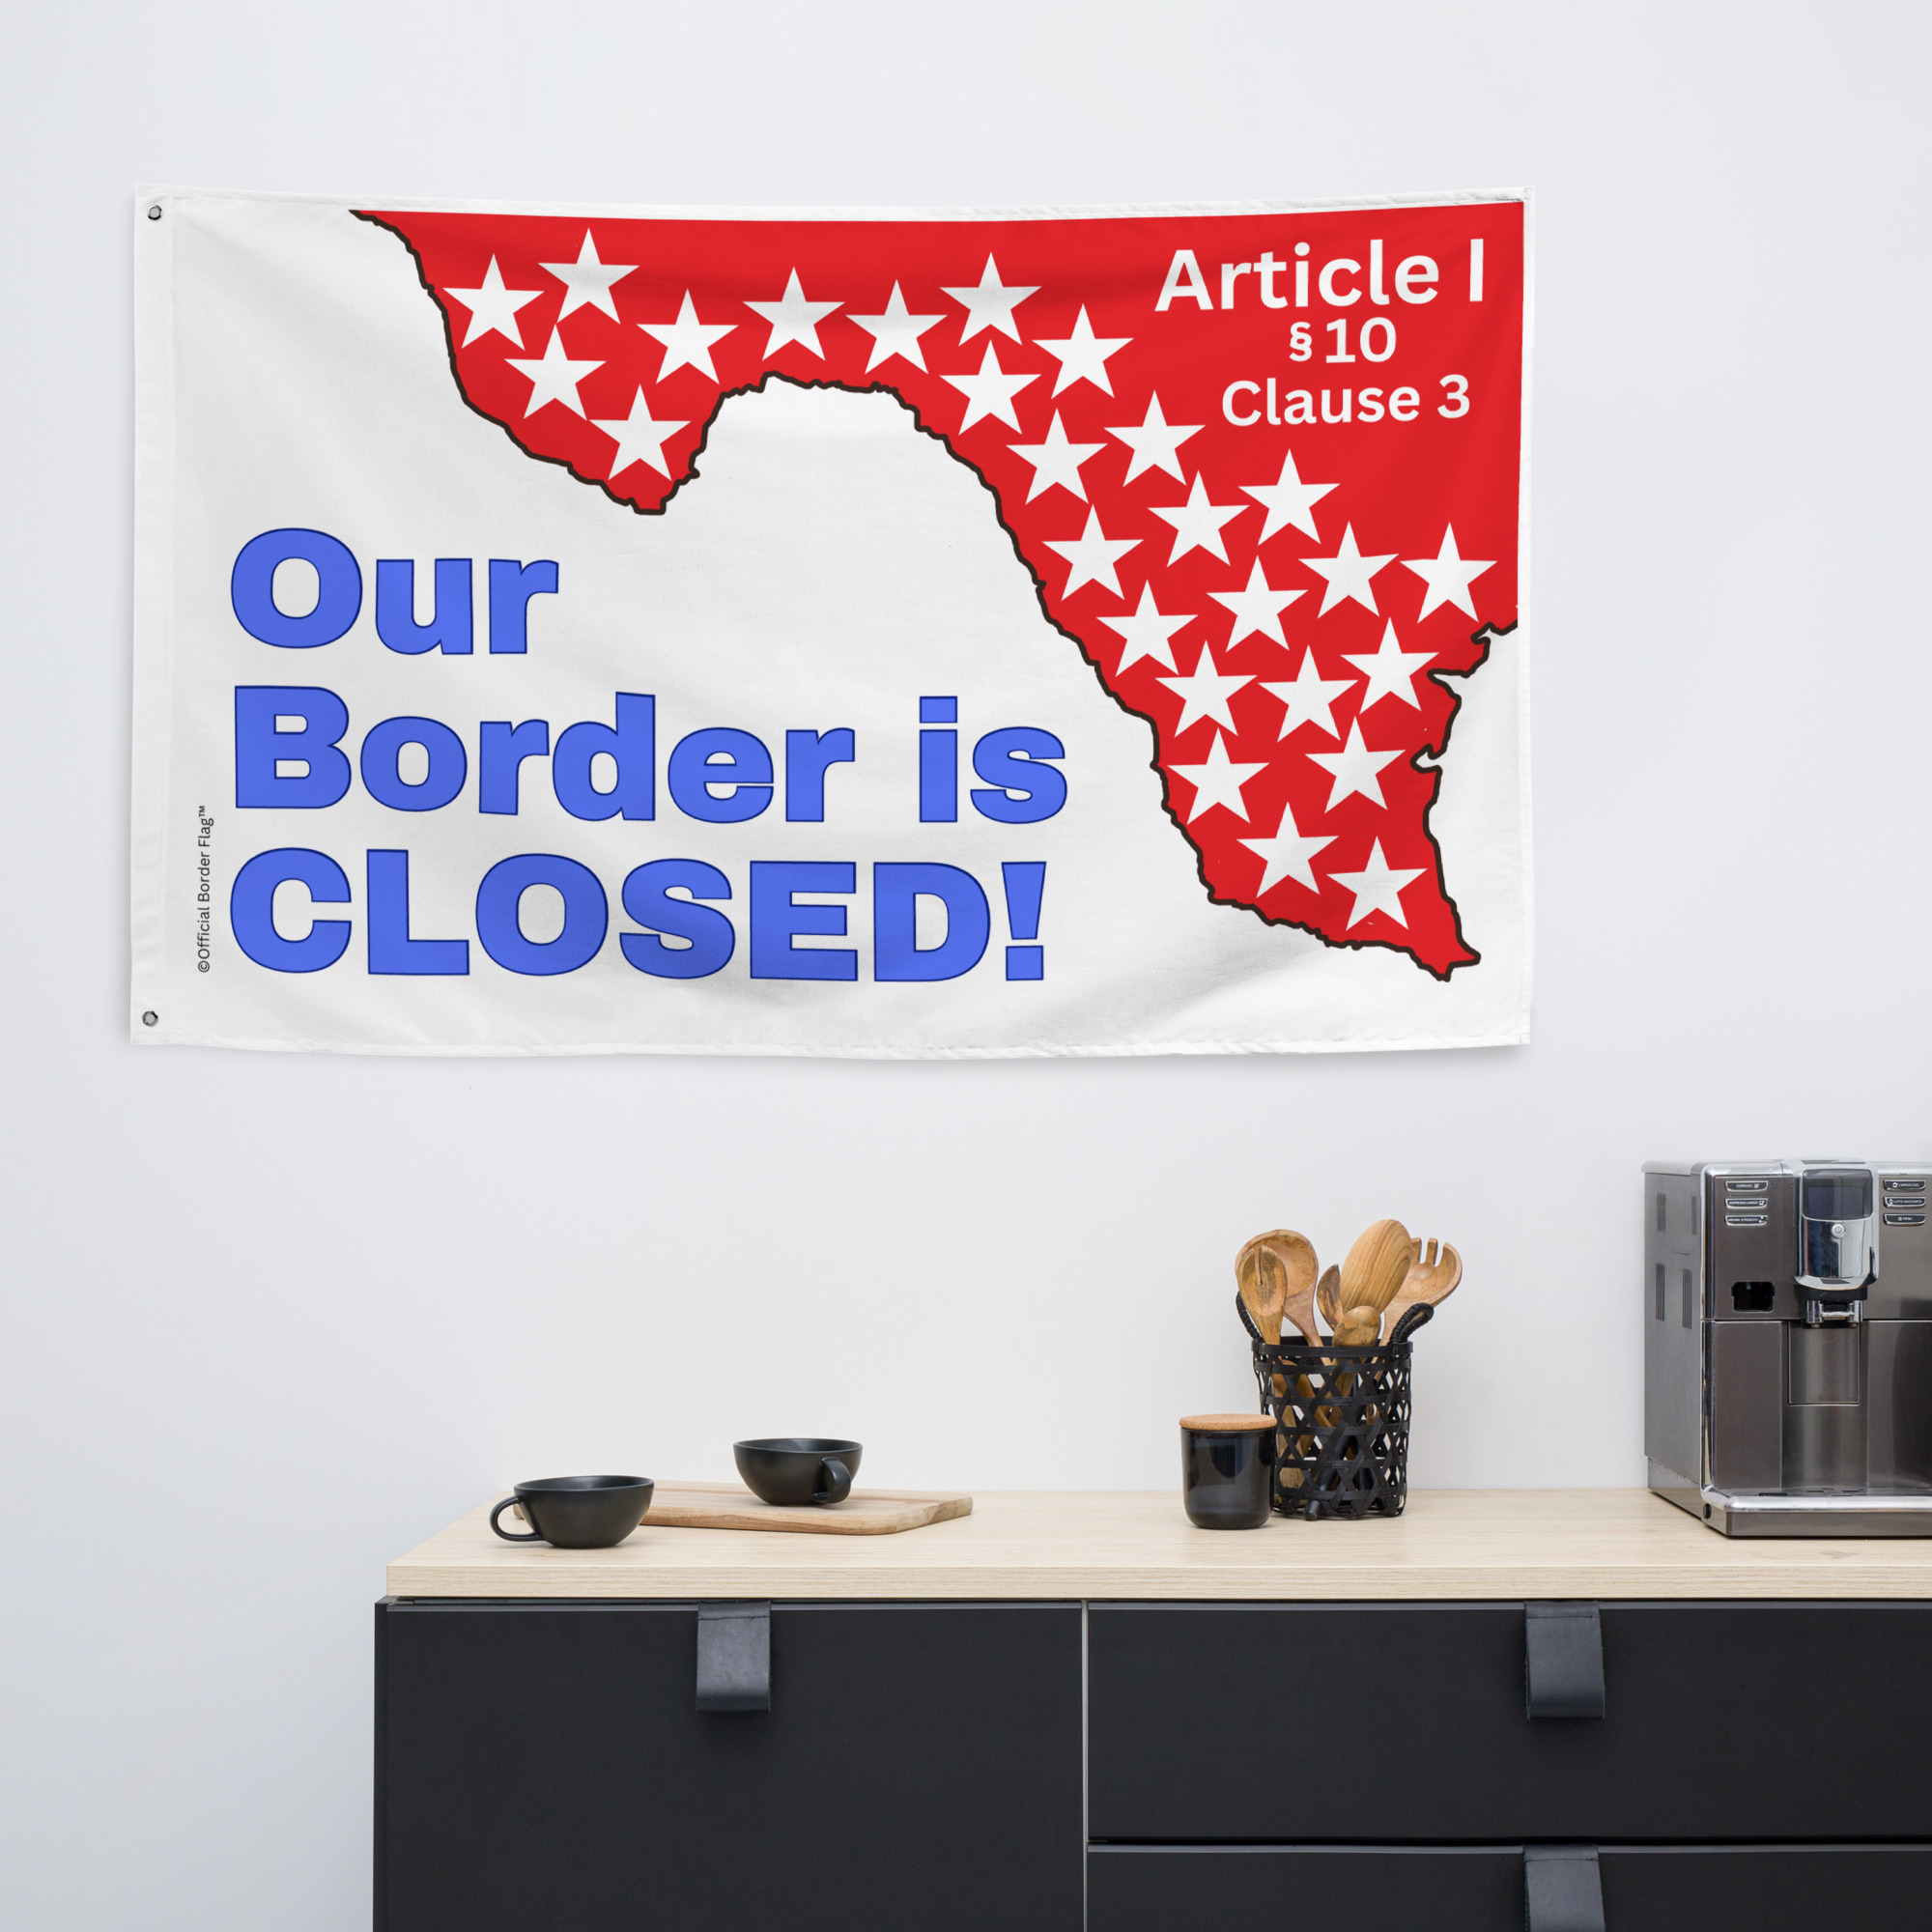 Our Border is Closed